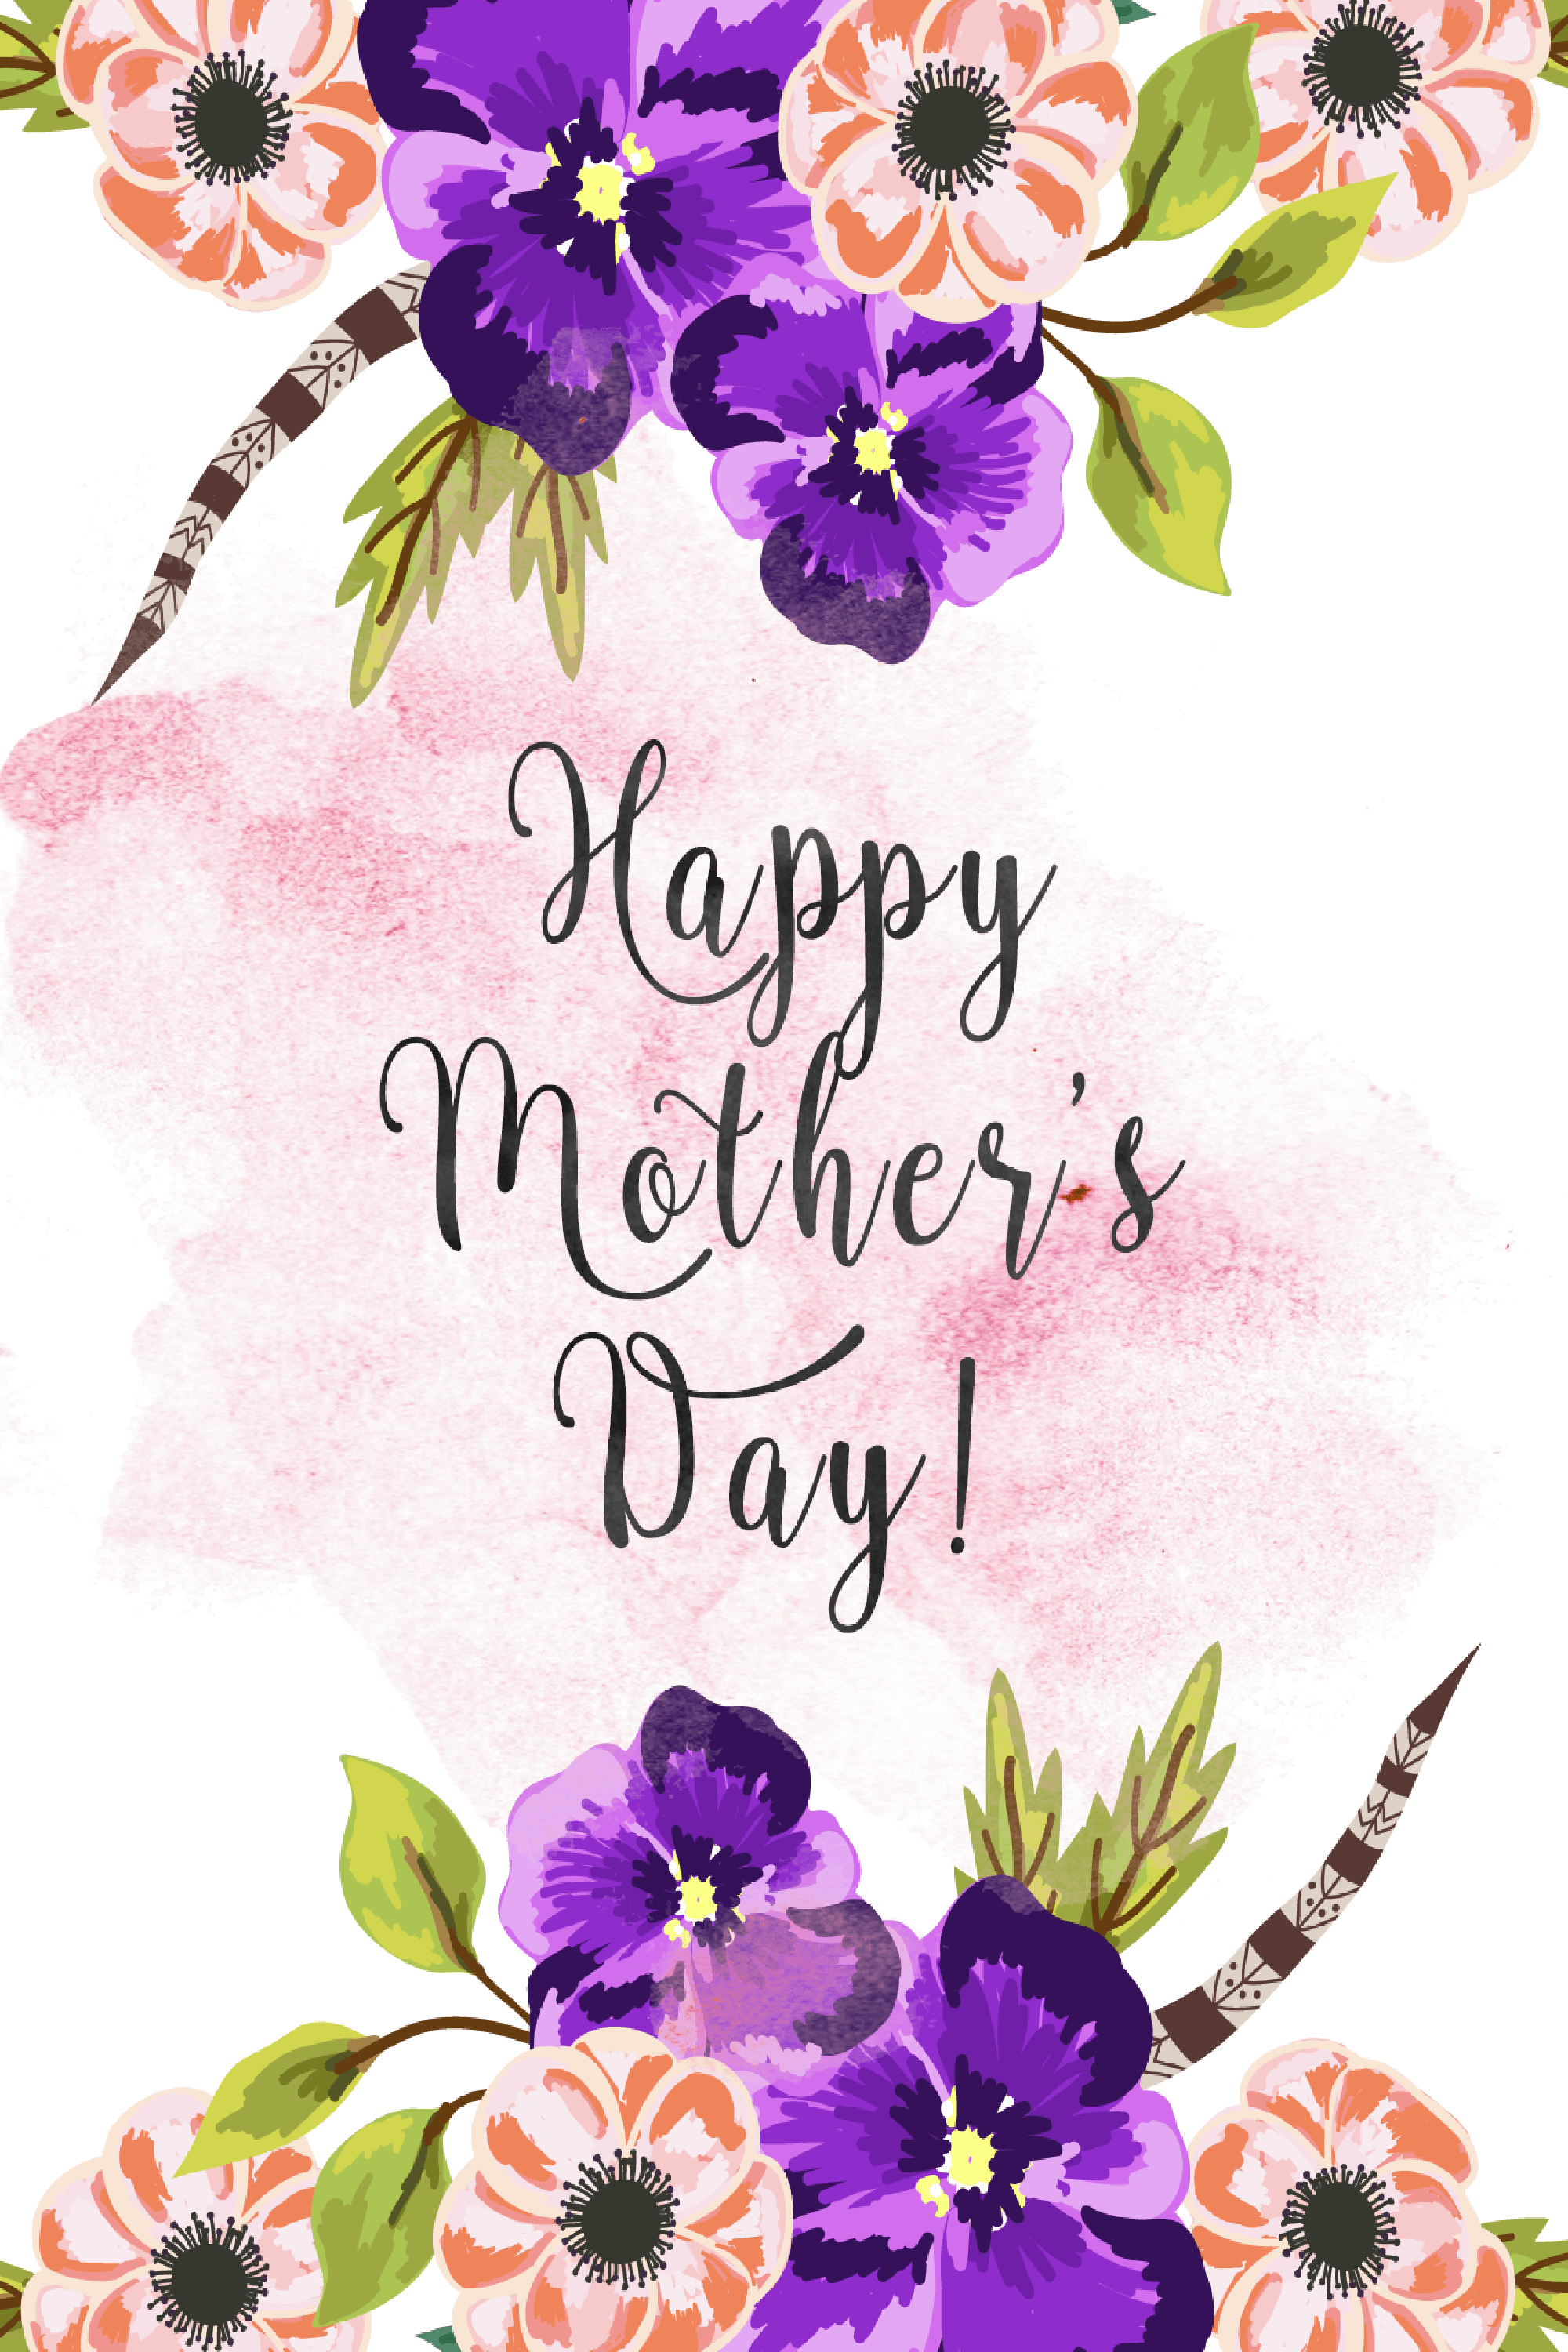 30 Cute Free Printable Mothers Day Cards - Mom Cards You Can Print - Make Mother Day Card Online Free Printable